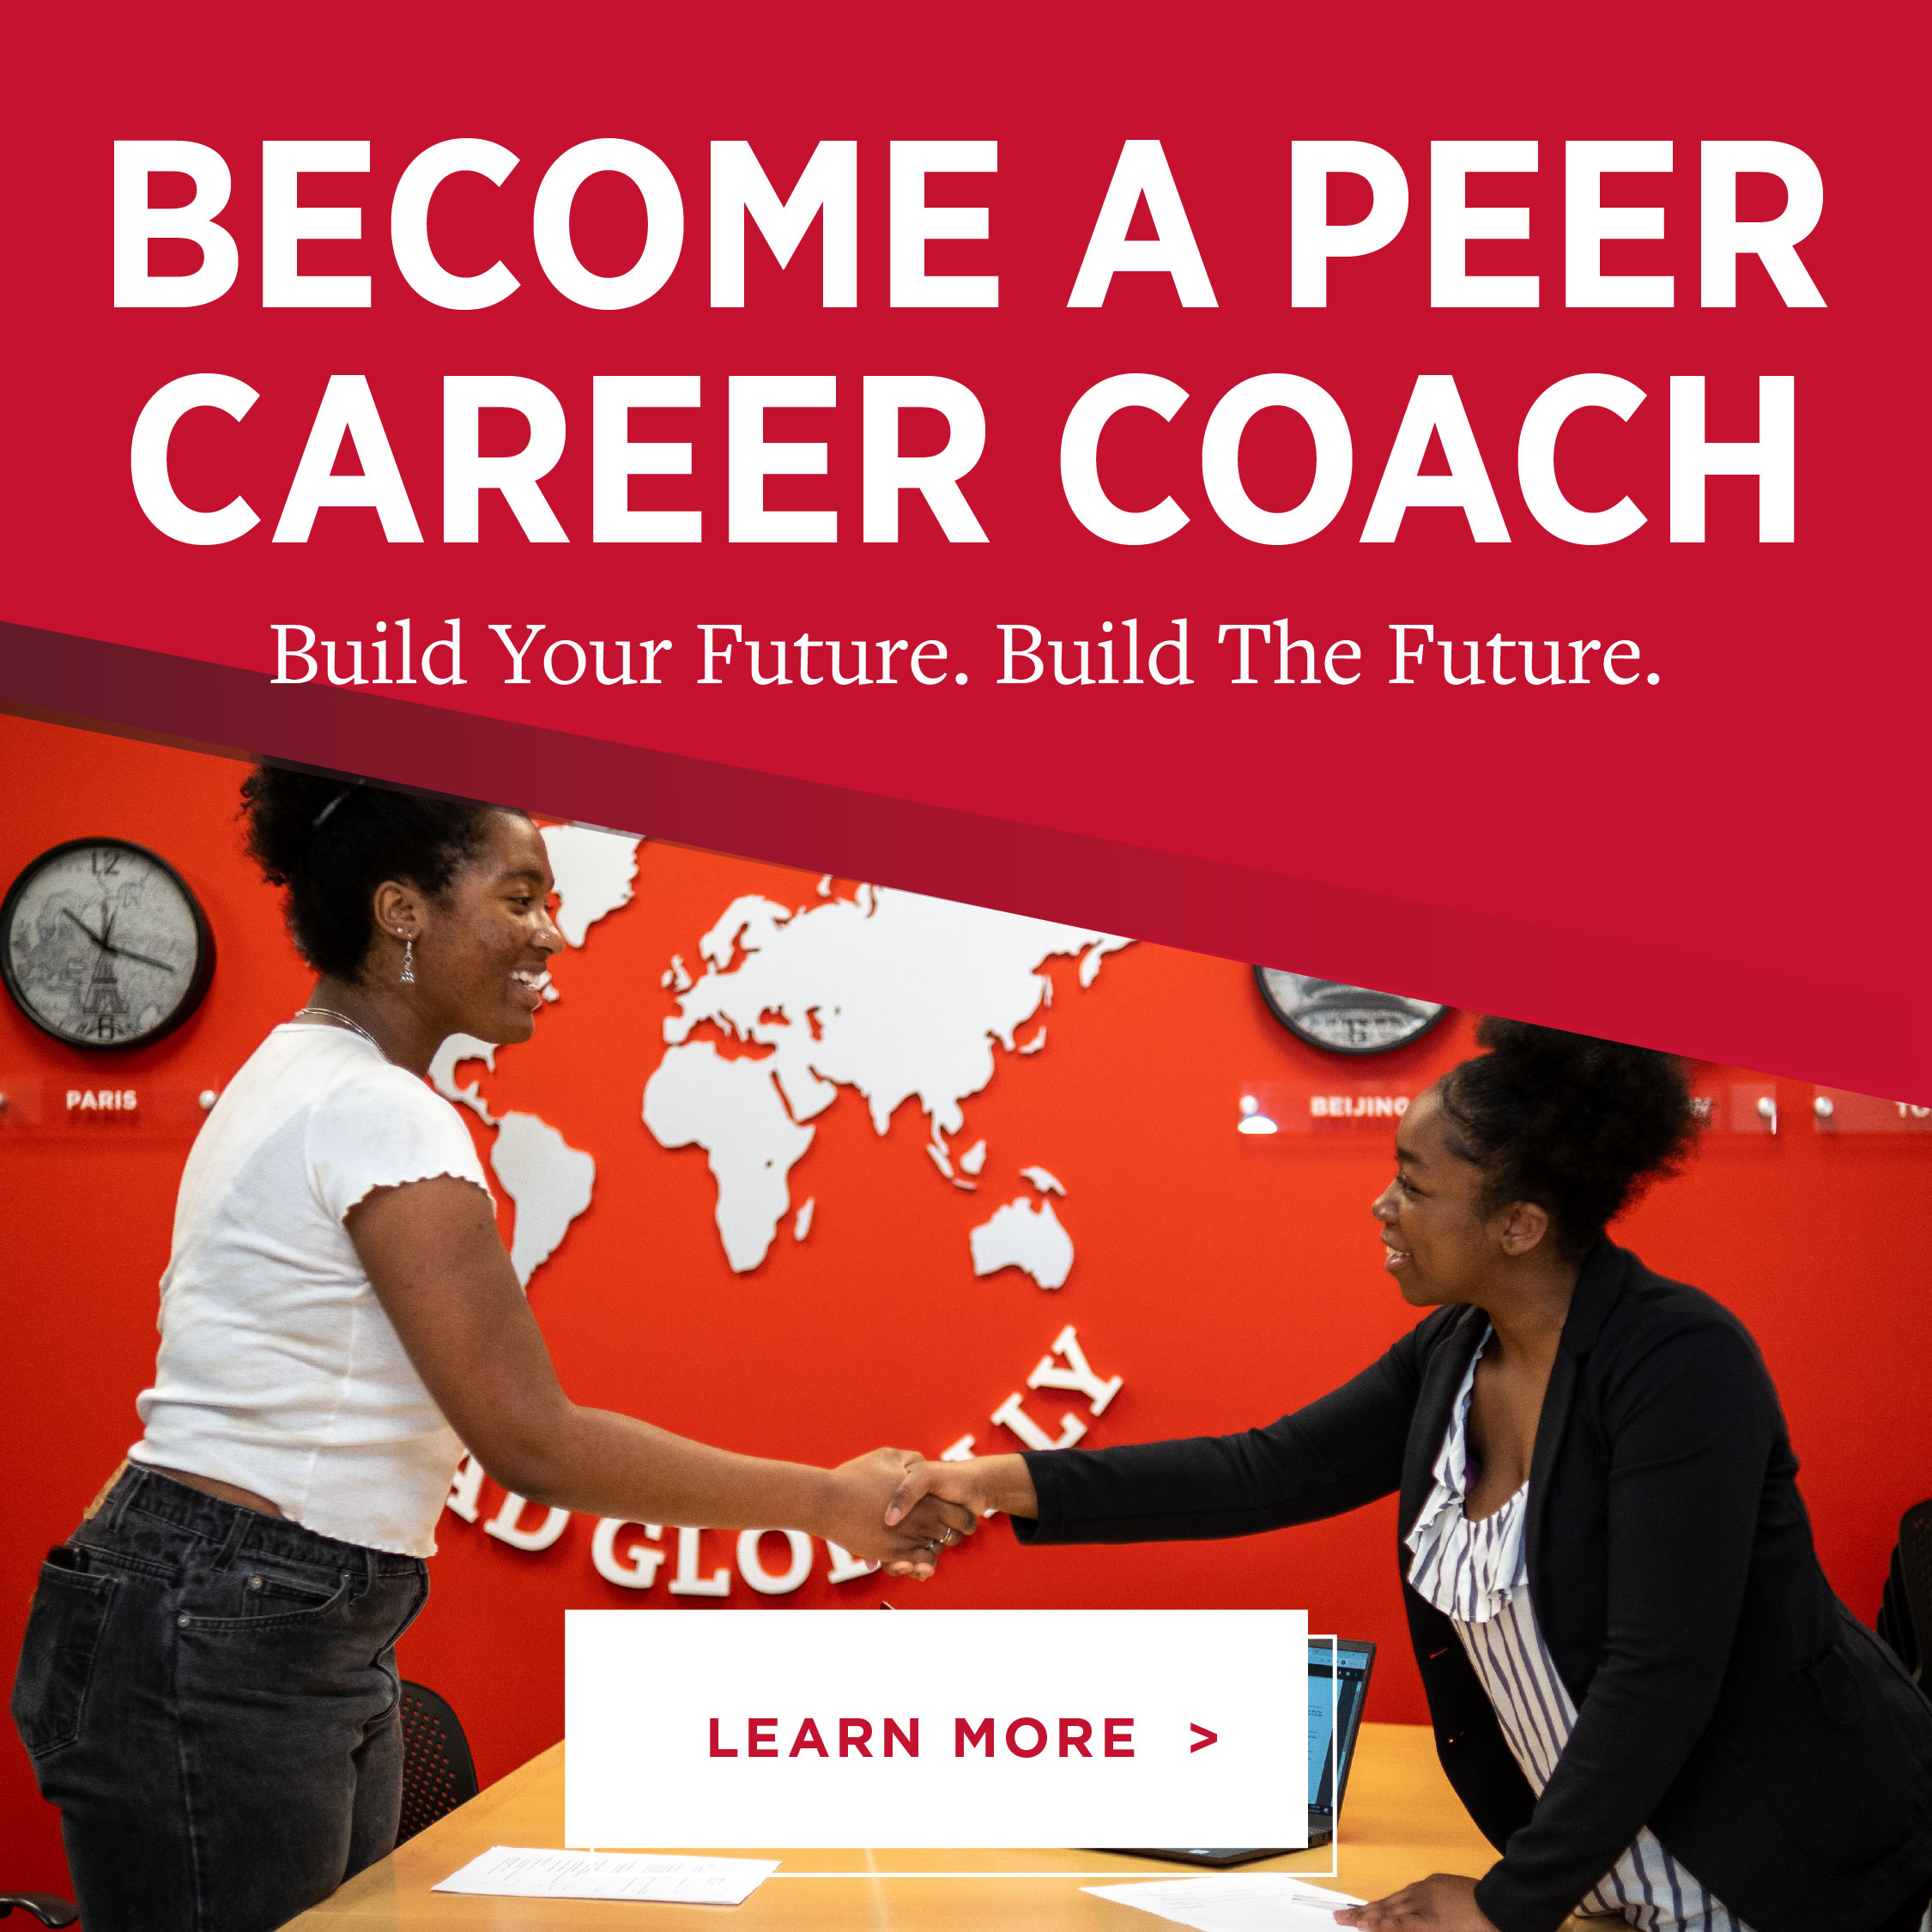 A graphic reading "Become a Peer Career Coach. Build Your Future. Build The Future." Pictures two students shaking hands.